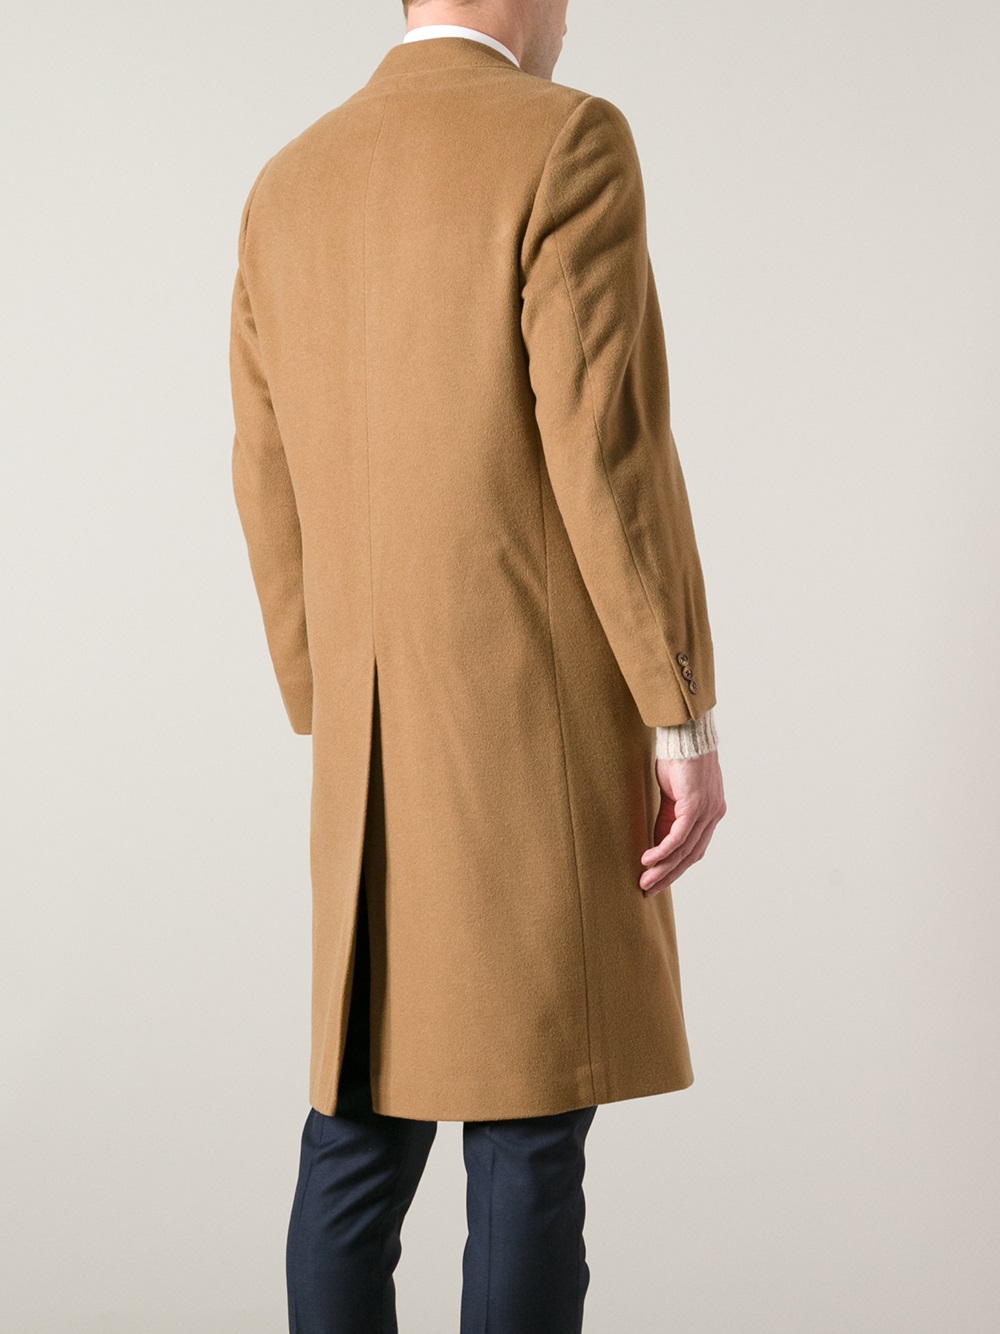 Aquascutum Cashmere and Wool Coat in Brown for Men - Lyst